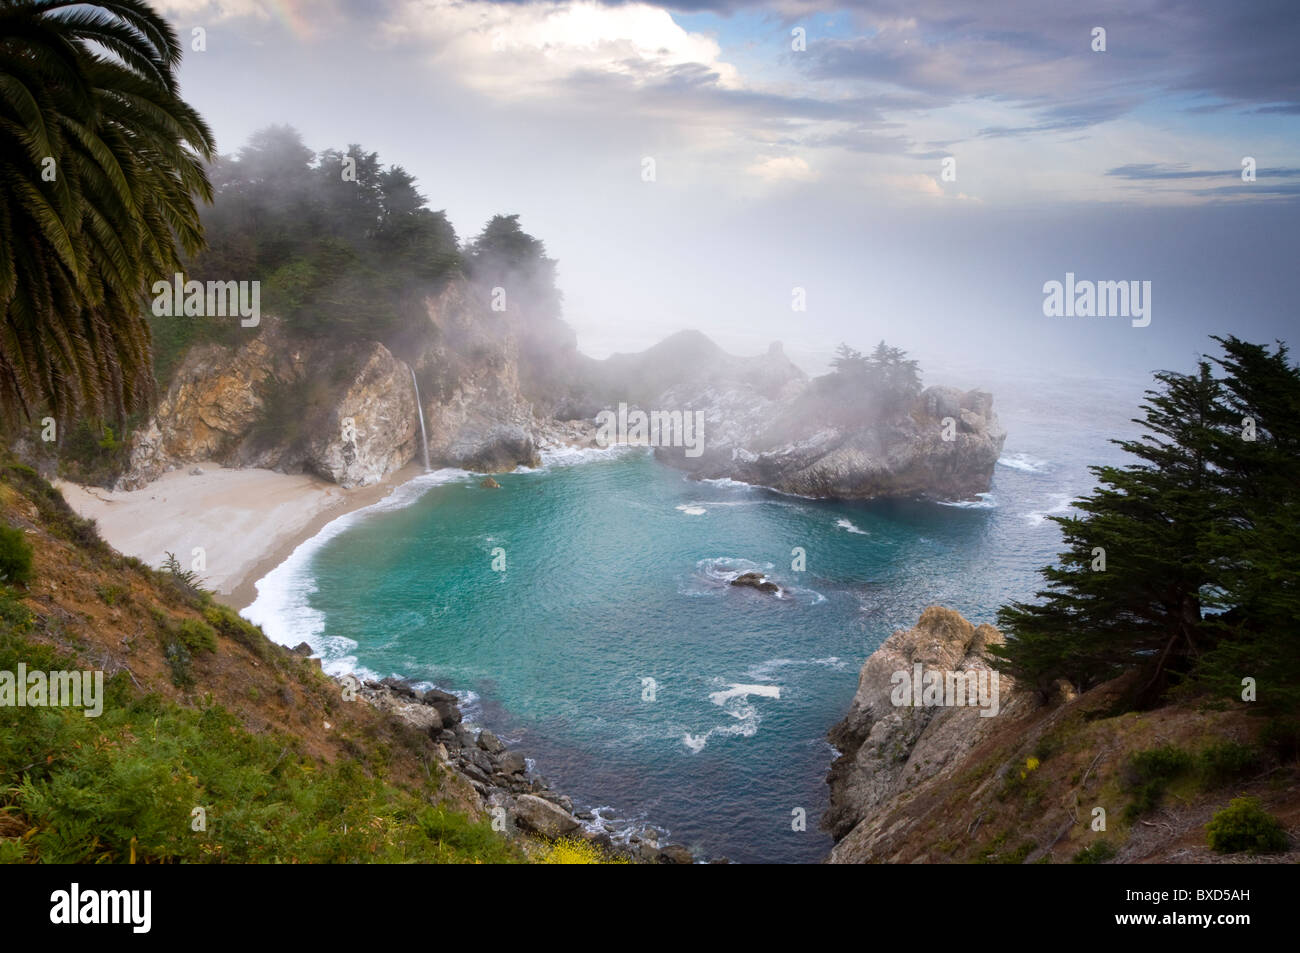 Fog rolls in at the classic Big Sur overlook in Julia Pfeiffer Burns State Park in California. Stock Photo